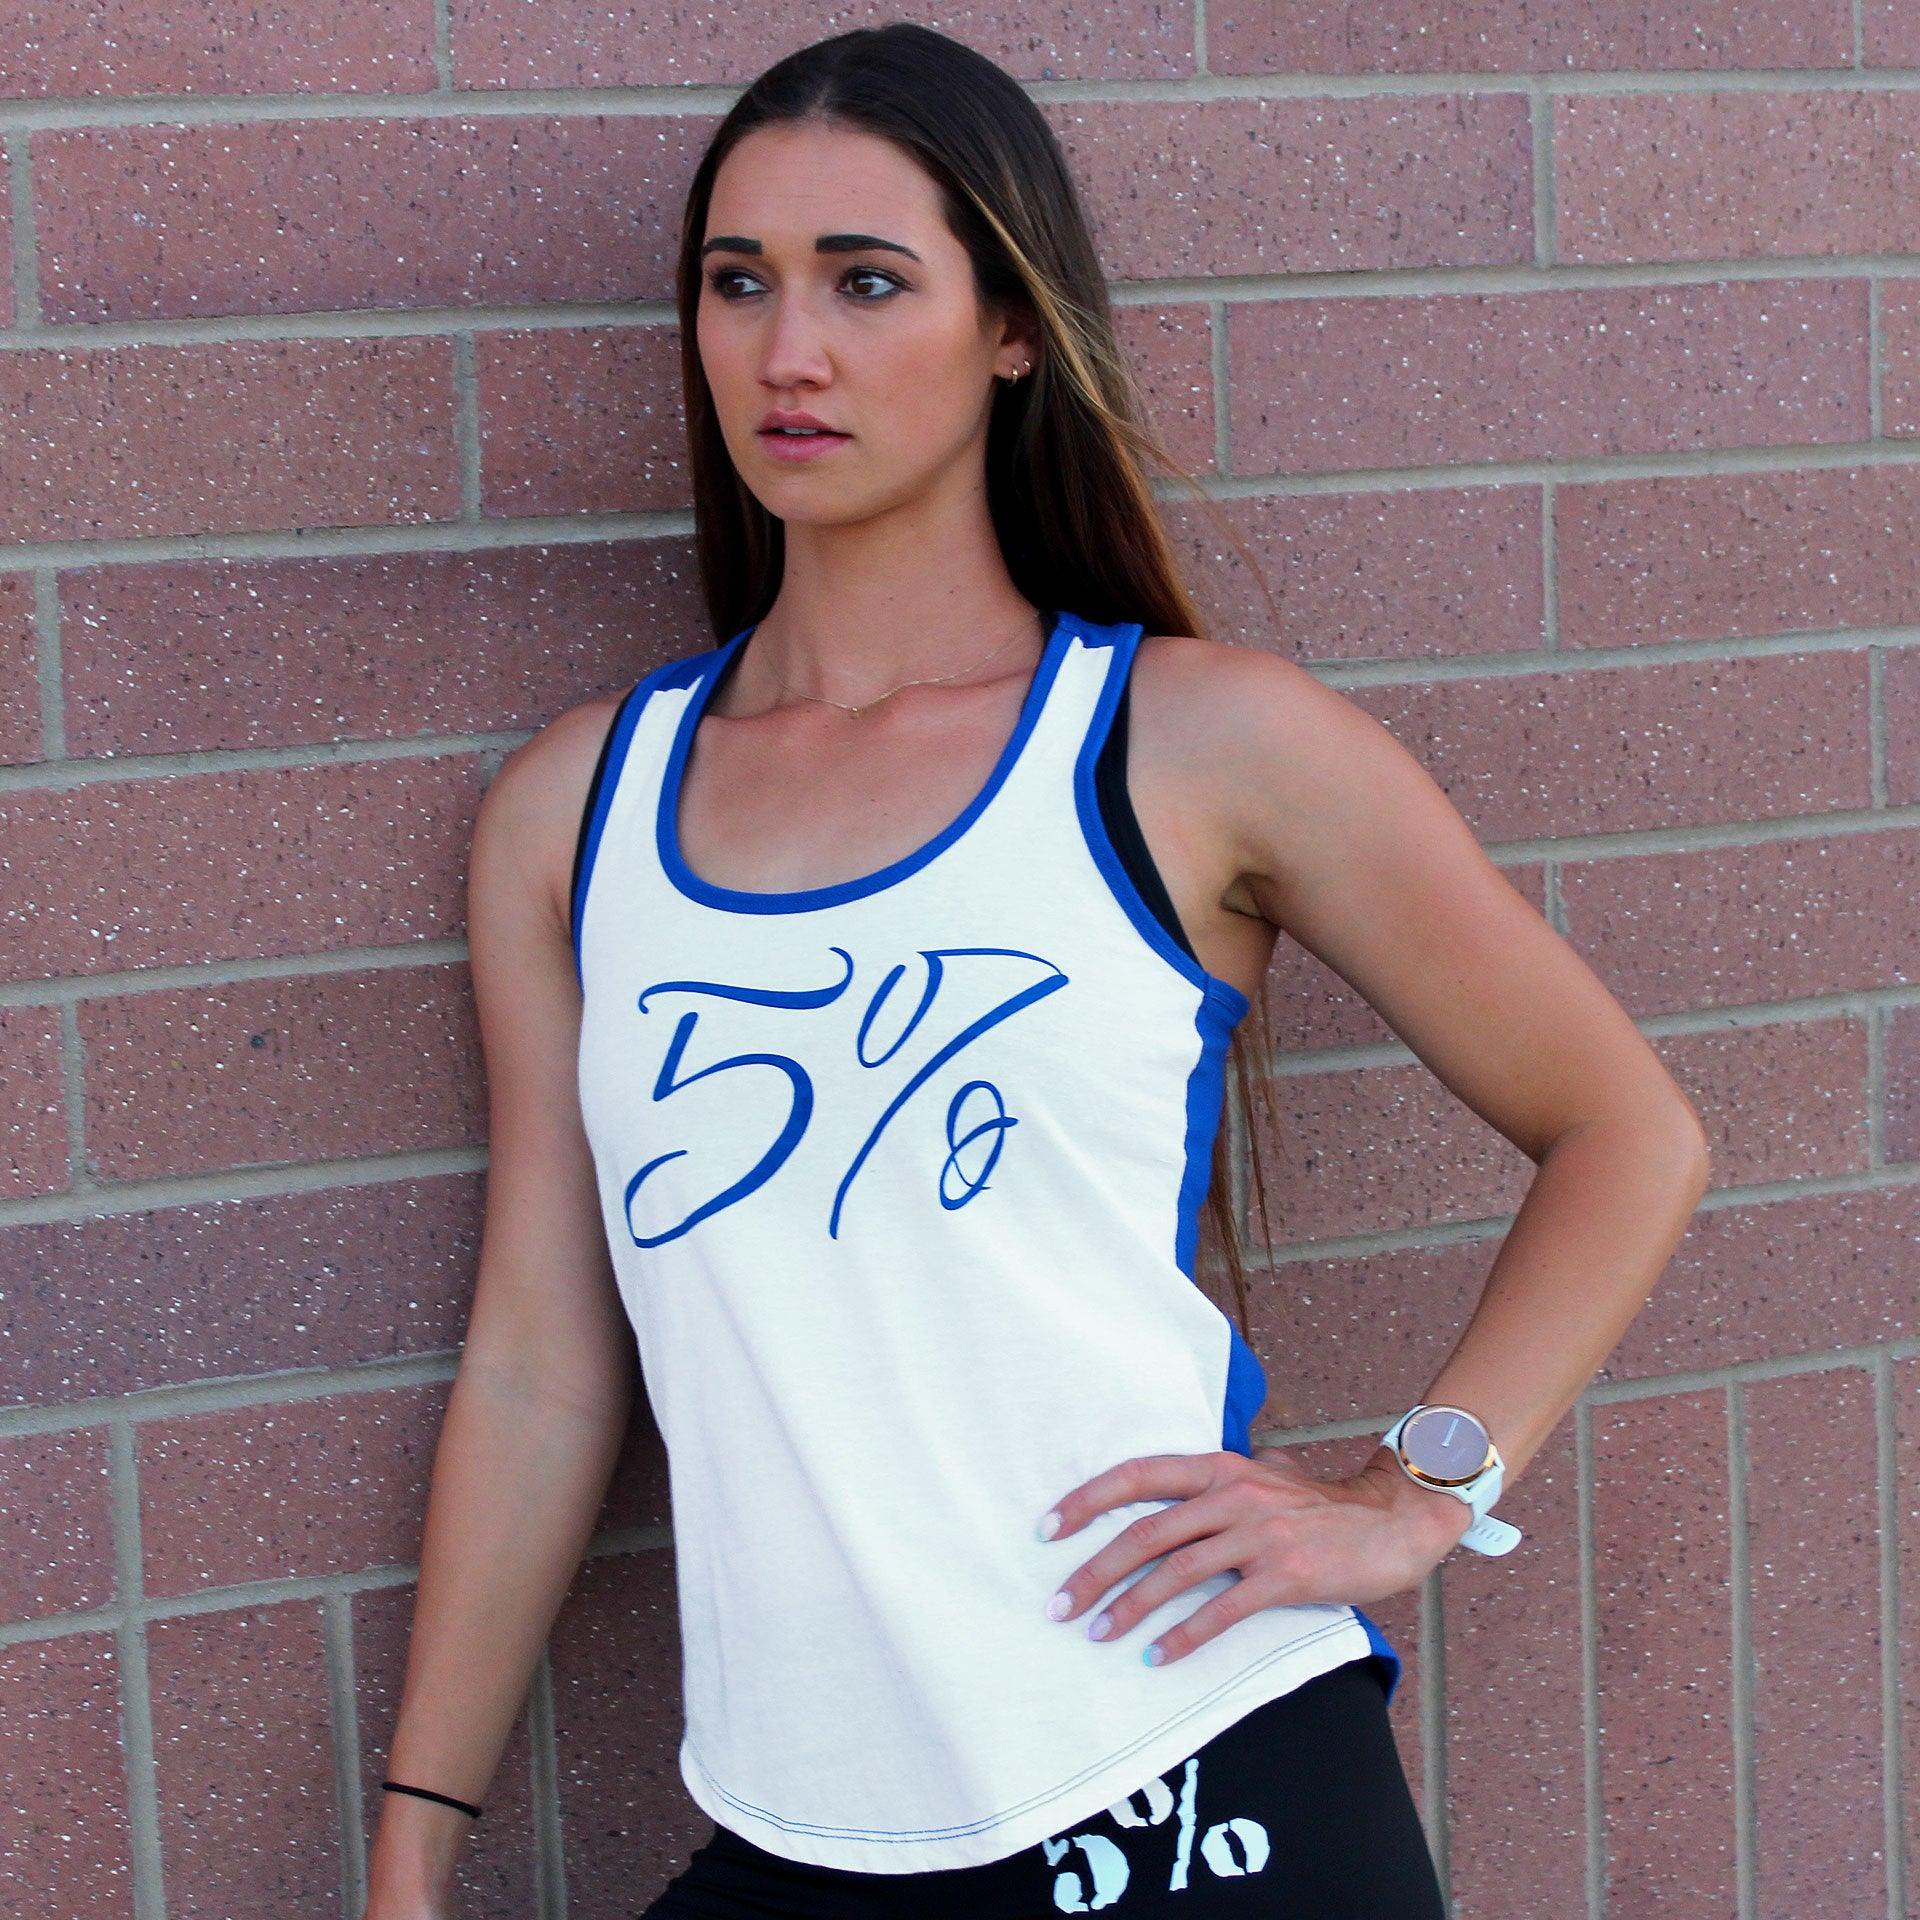 5% Women's Blue and White Tank - 5% Nutrition